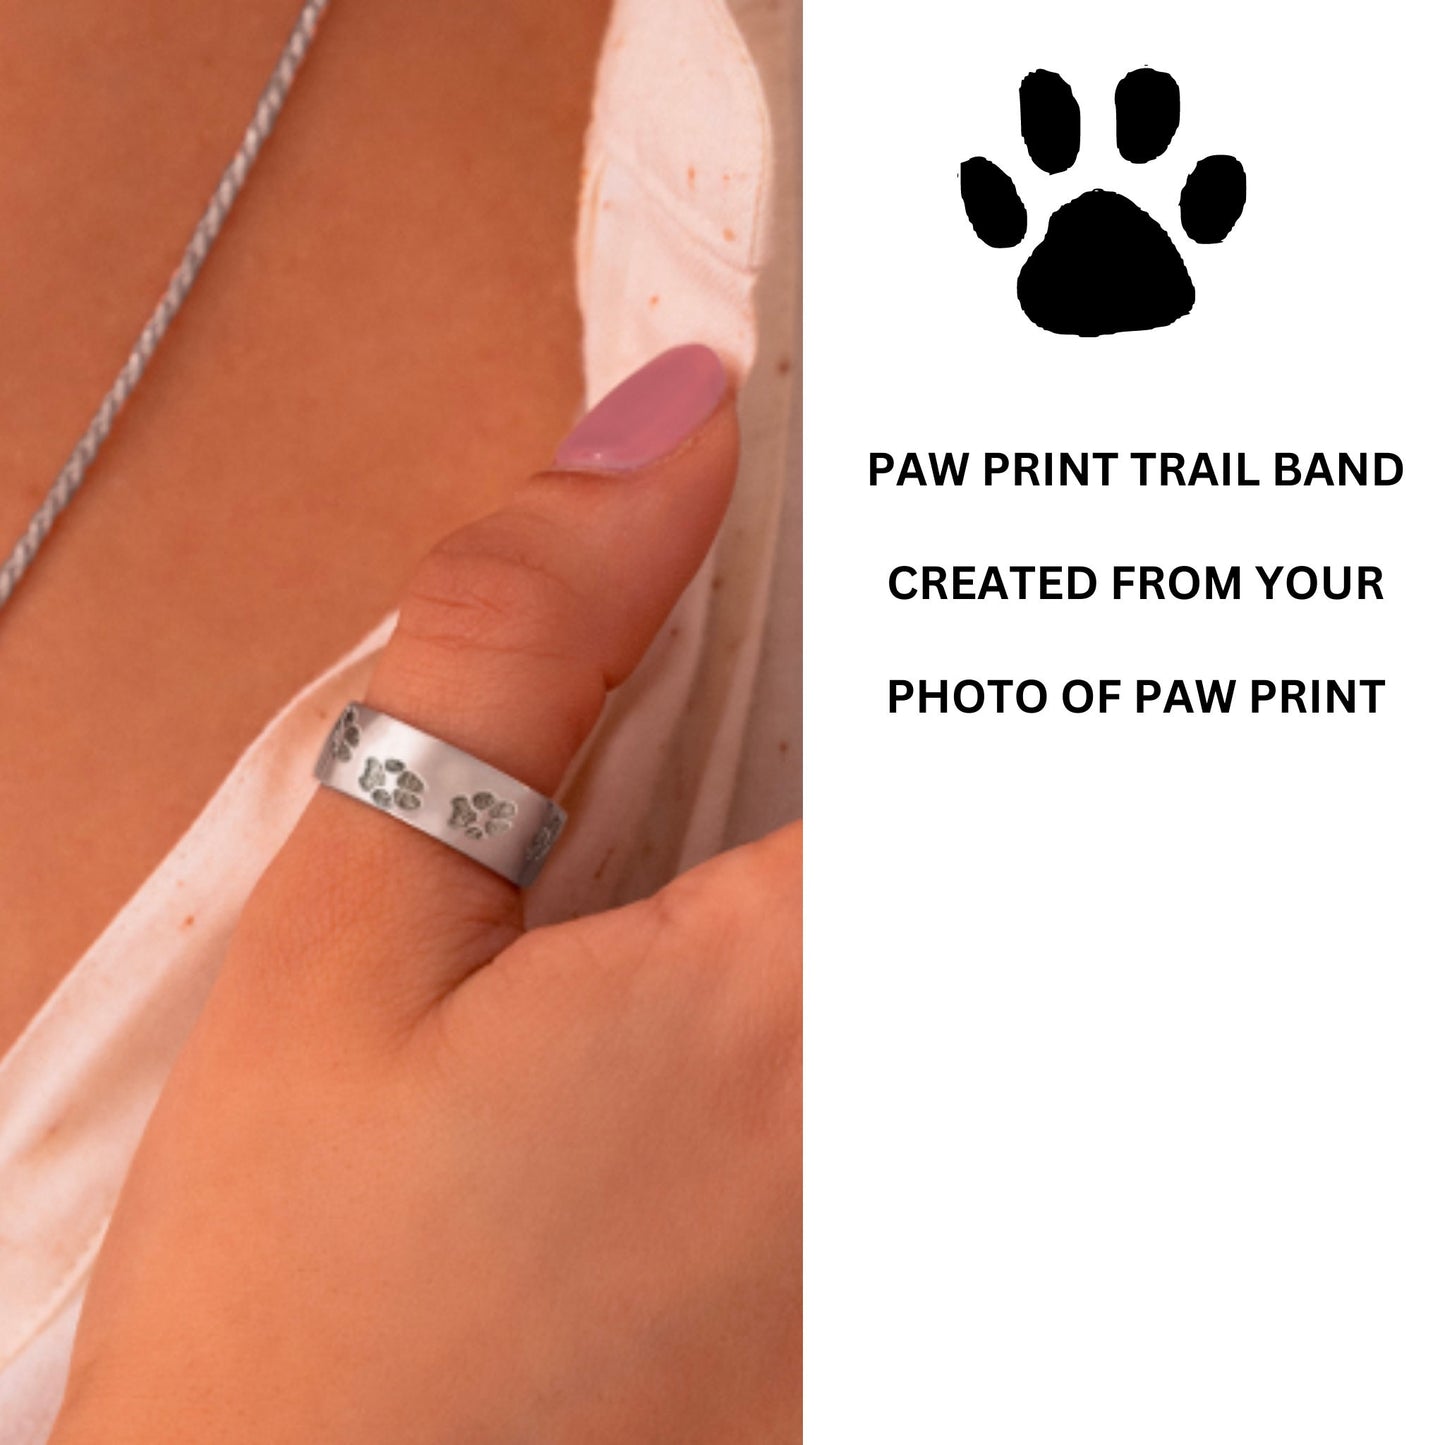 Personalized Jewelry Wrap-Around Paw Print Band Ring, Paw Print Jewelry, Sterling Silver Handmade Ring, Dog Mom, Pet Memorial Band